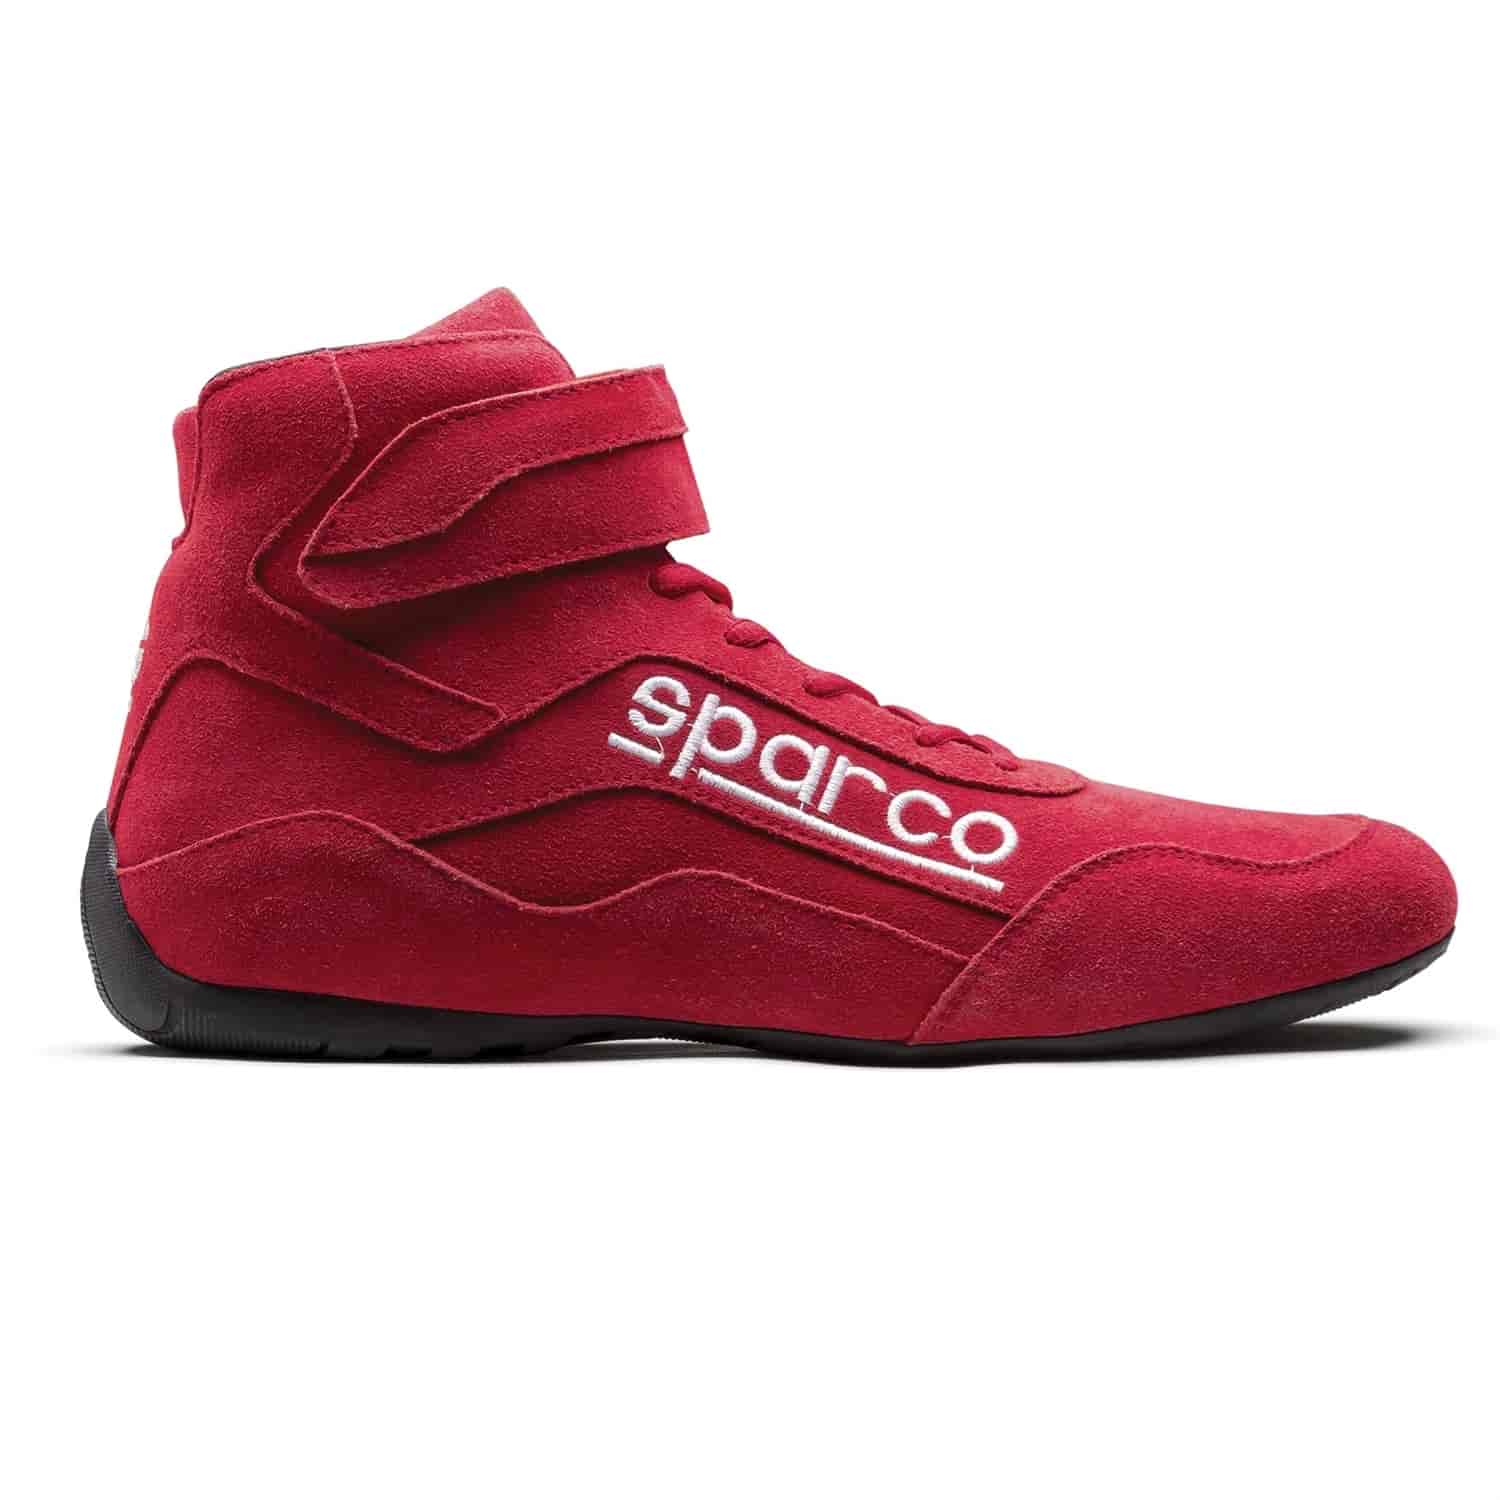 Race 2 Shoe Size 8 - Red